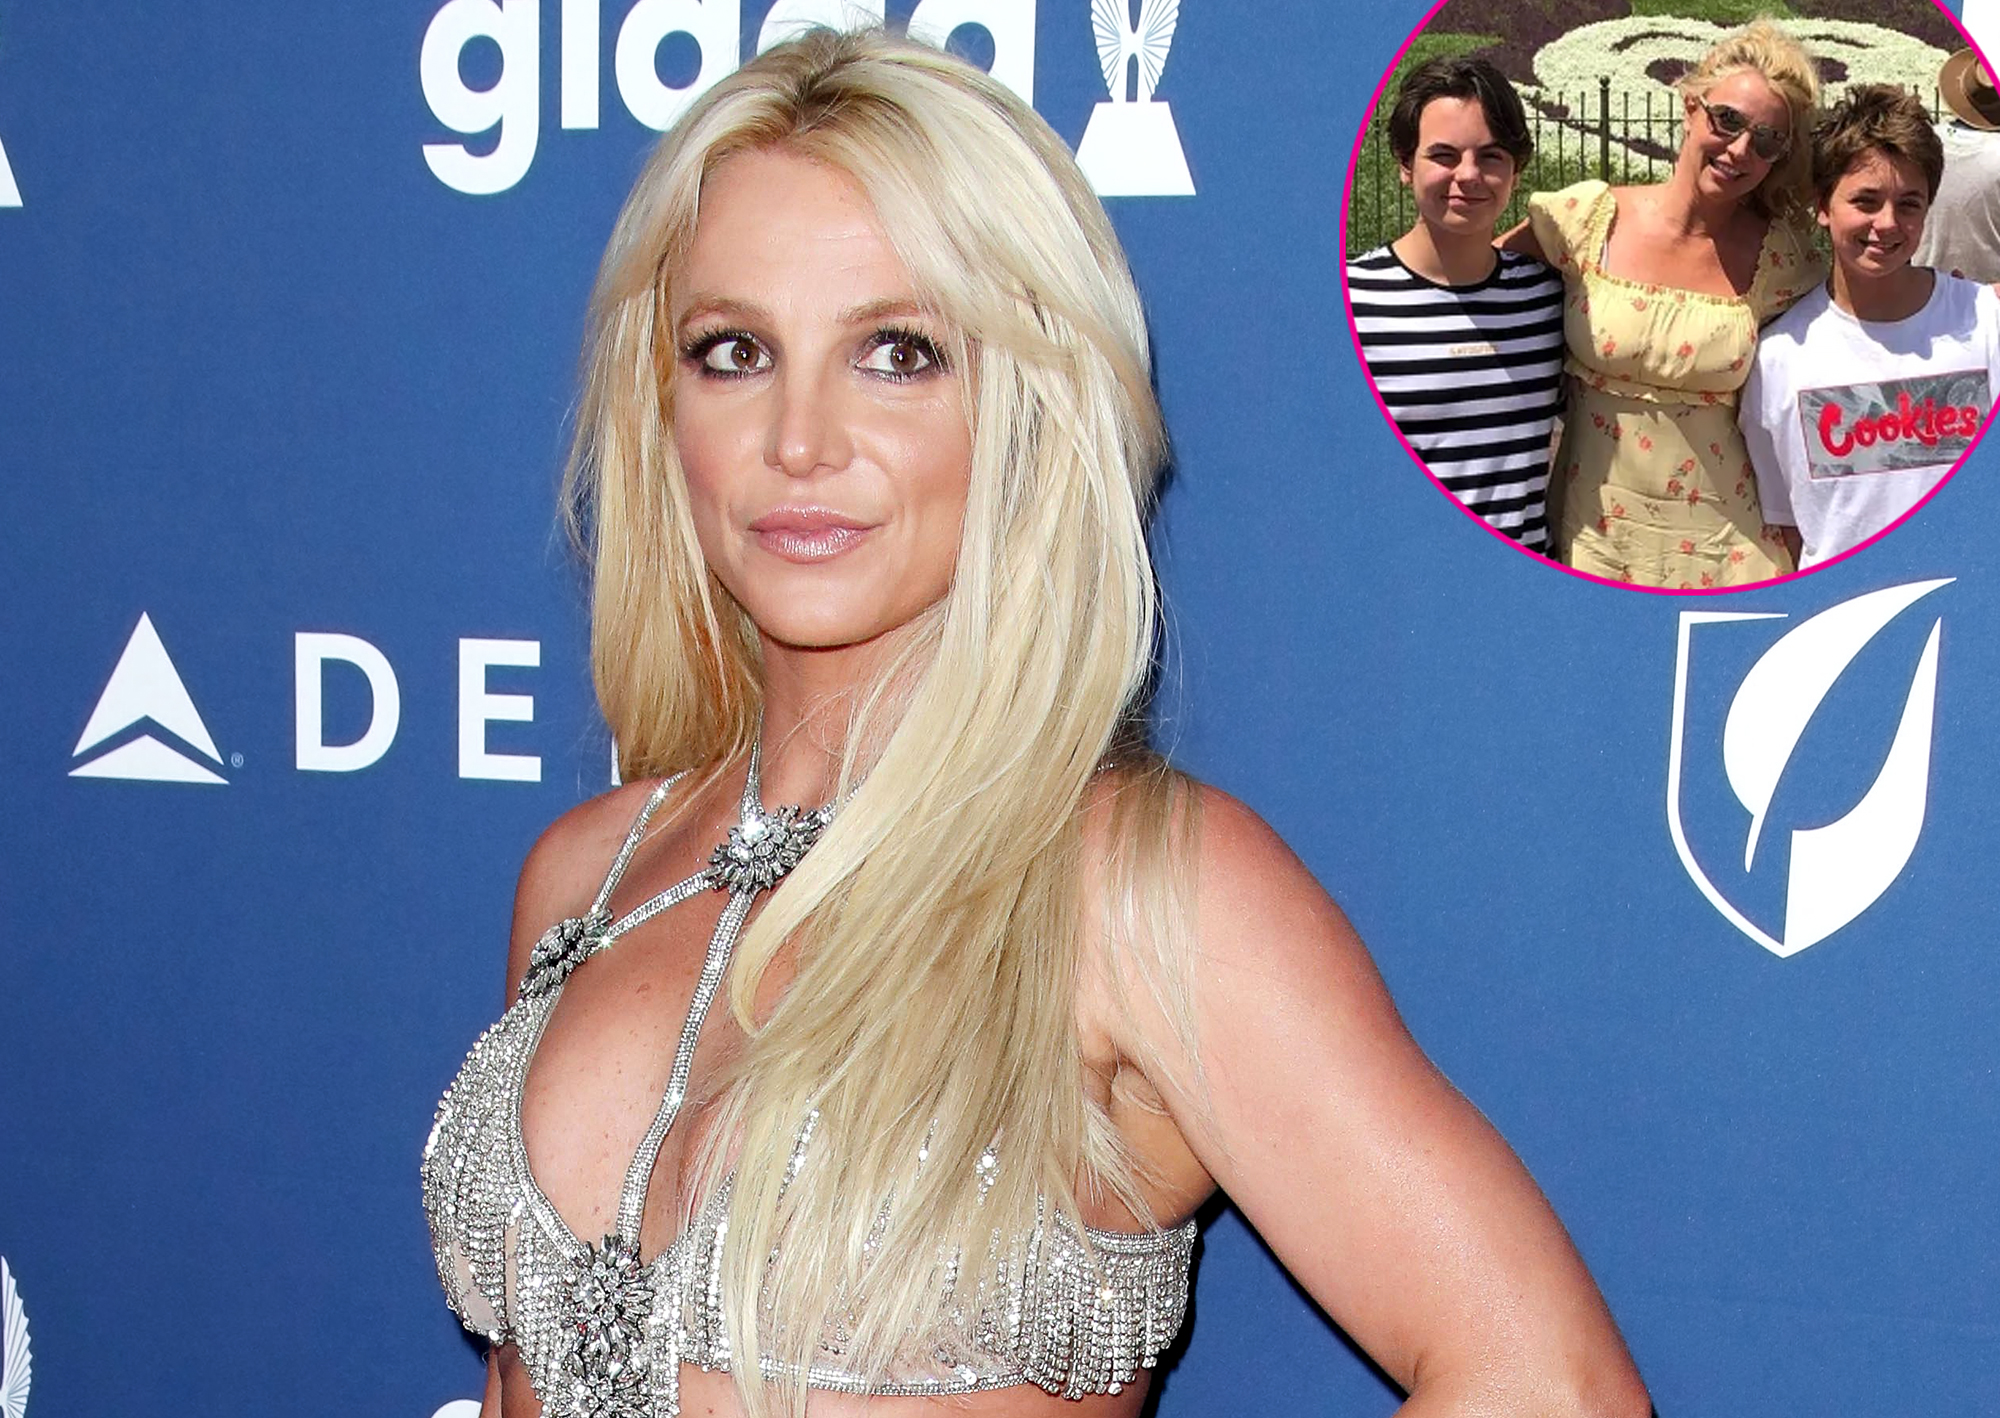 Britney Spears hasn’t seen Sons in over 1 year, documentary claims